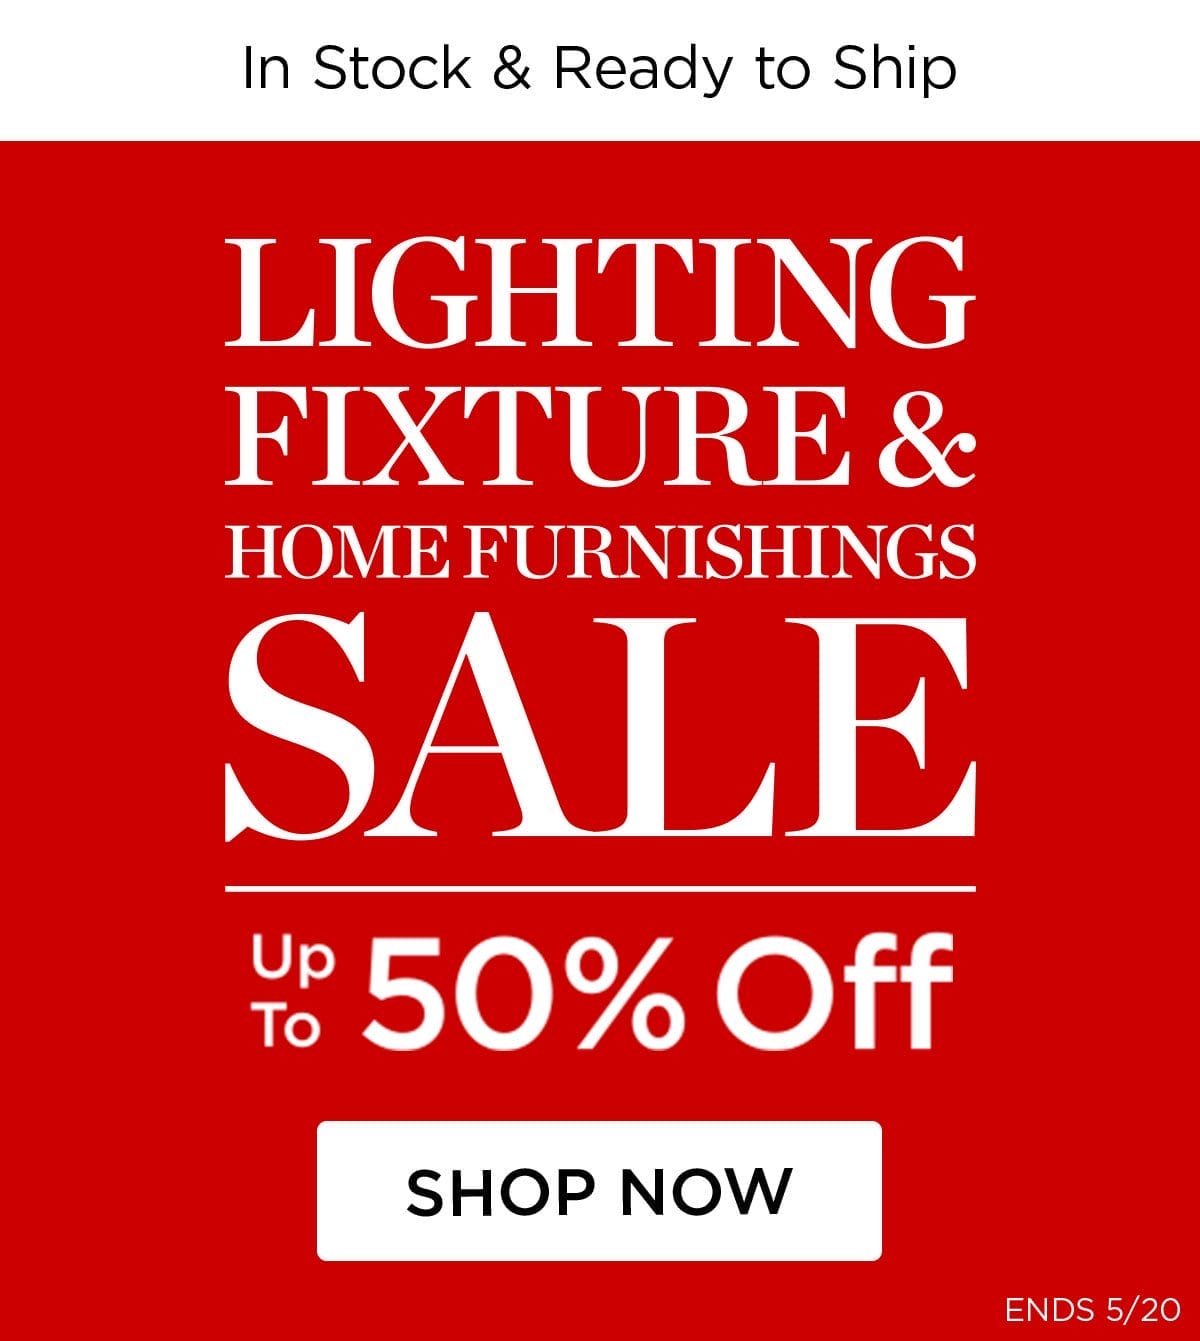 In Stock & Ready to Ship - Lighting Fixture & Home Furnishings Sale - Up to 50% Off - Shop Now - Ends 5/20